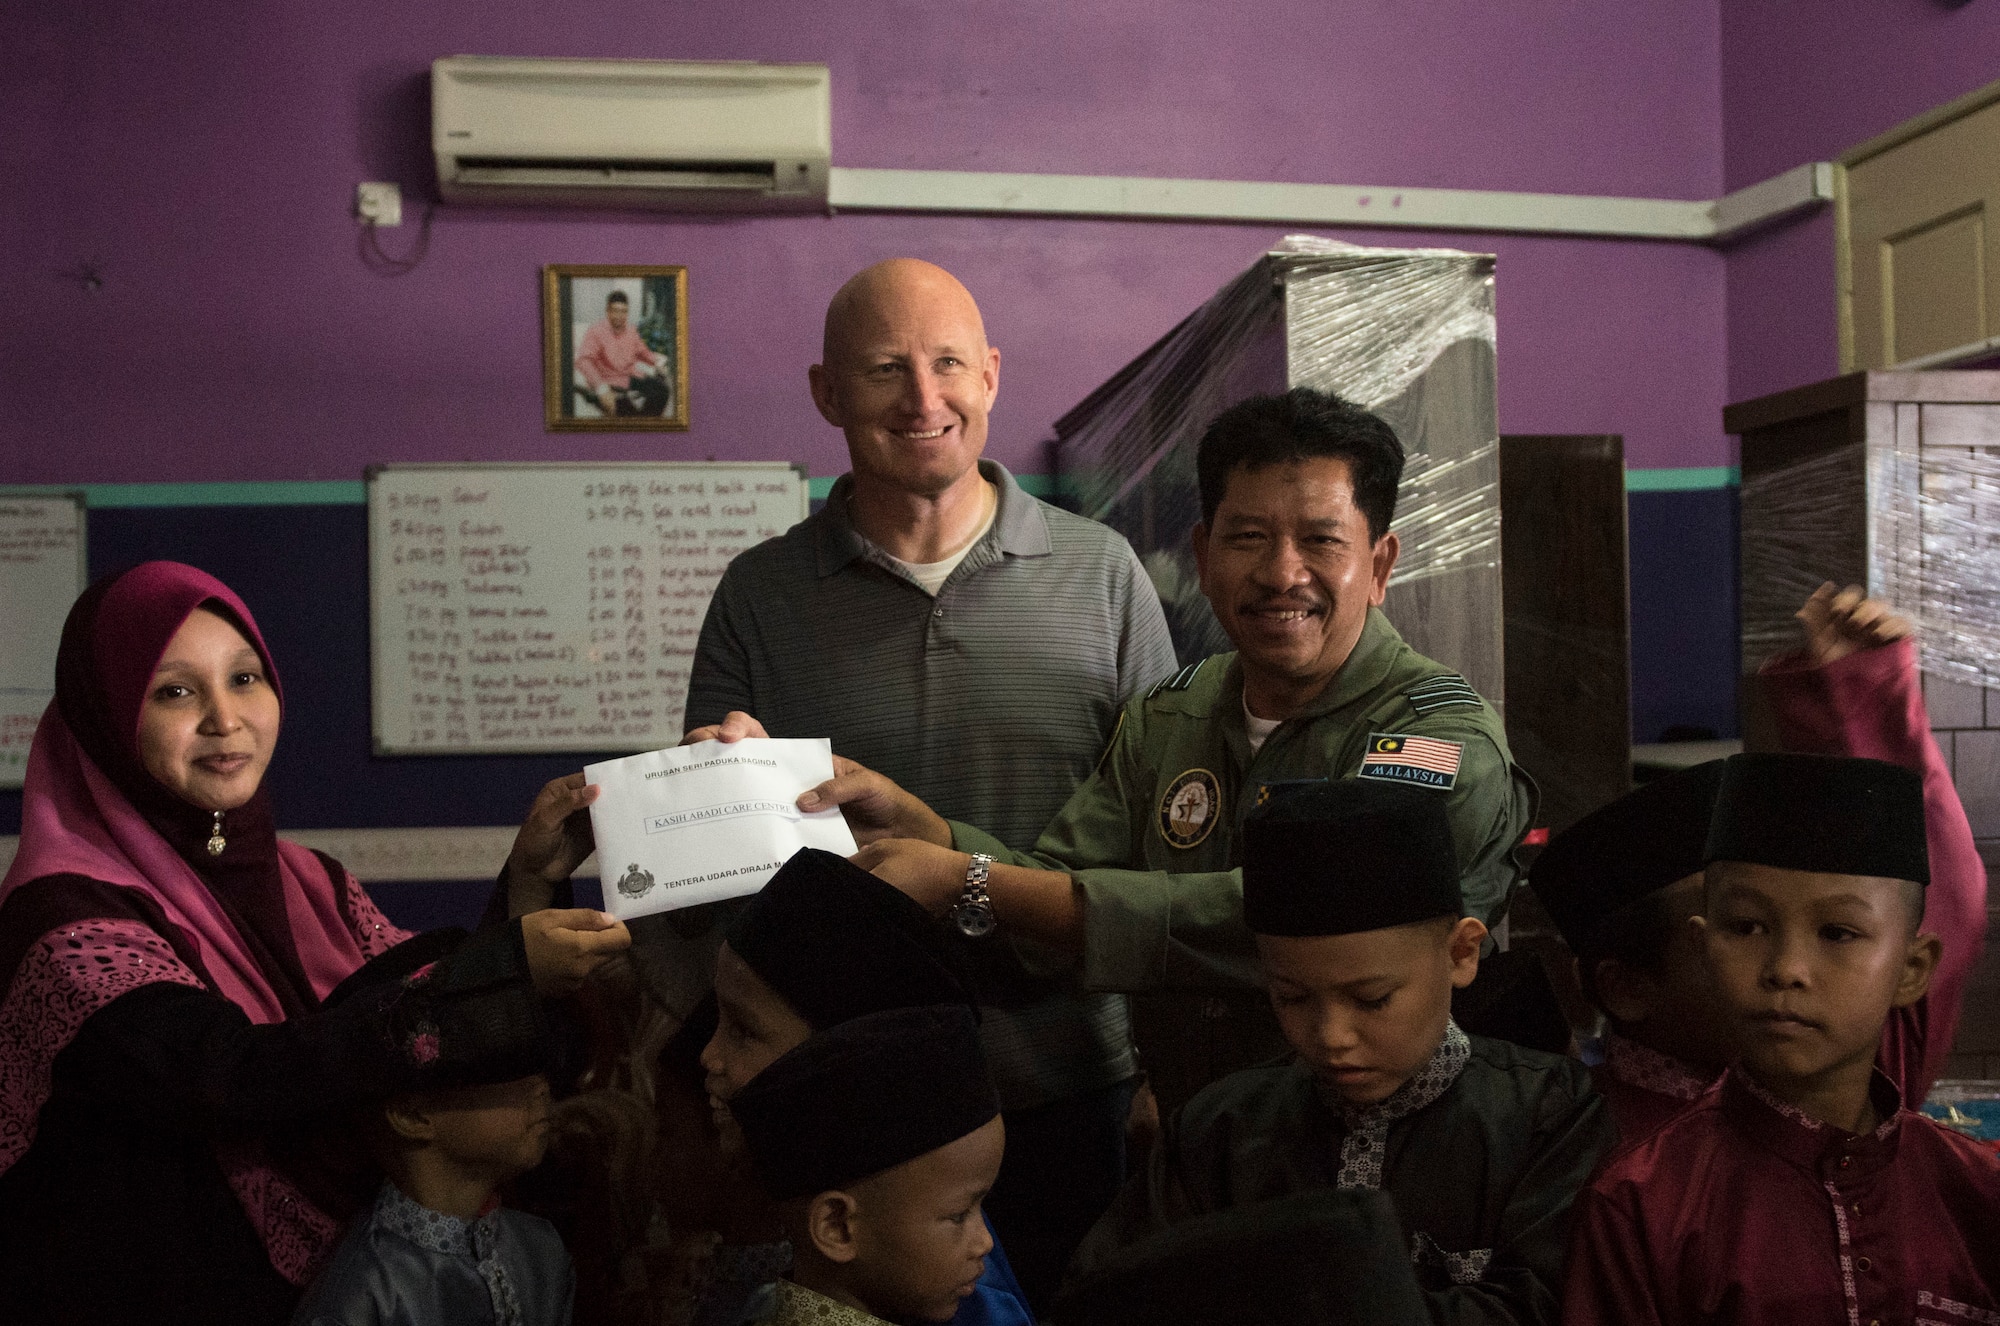 Col. Travis Rex, USAF Exercise Director and Col. Sun Thong, RMAF Exercise Director present a monetary donation to the Kasih Abadi Care Center, during Cope Taufan 16 in Seberan Jaya, Pulau Pinang, July 23, 2016. As part of a community relations event USAF and RMAF visited two local orphanages, donated money and provided furniture to children in need. CT 16 is a PACAF-led exercise that reinforces U.S. Pacific Command Theater Security Cooperation goals for the Southeast Asian region and demonstrates U.S. capability to project forces strategically in a combined, joint environment.  More than 450 Airmen are participating, as well as four U.S. Air Force airframes. (U.S. Air Force photo by Tech. Sgt. Araceli Alarcon)